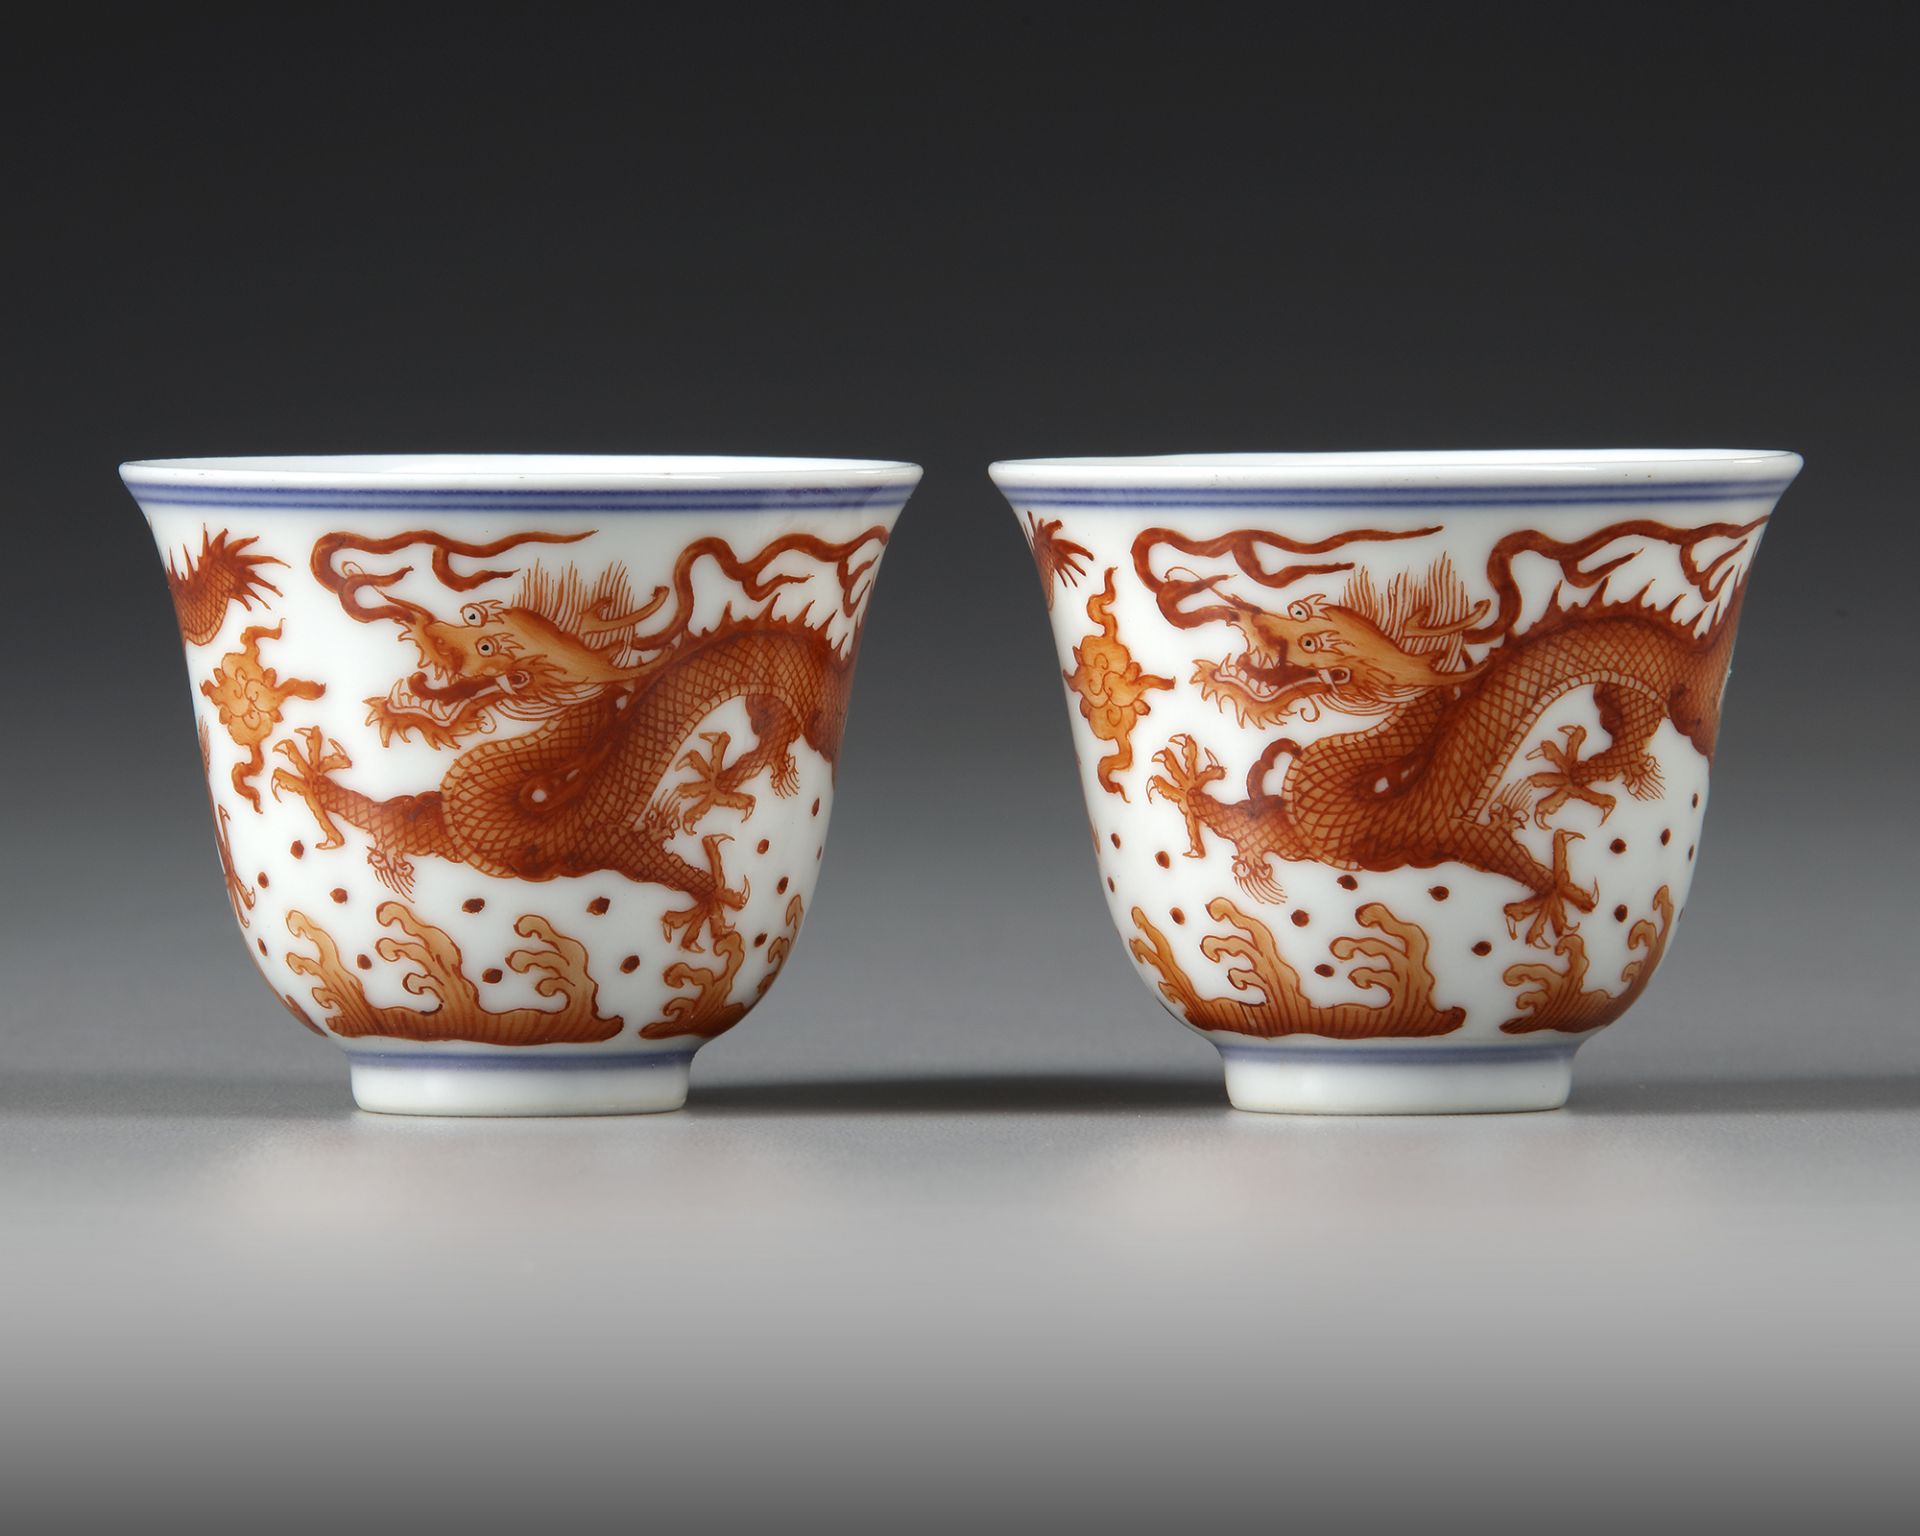 A PAIR OF CHINESE IRON-RED DRAGON DECORATED CUPS, QING DYNASTY (1644–1911) - Image 2 of 8